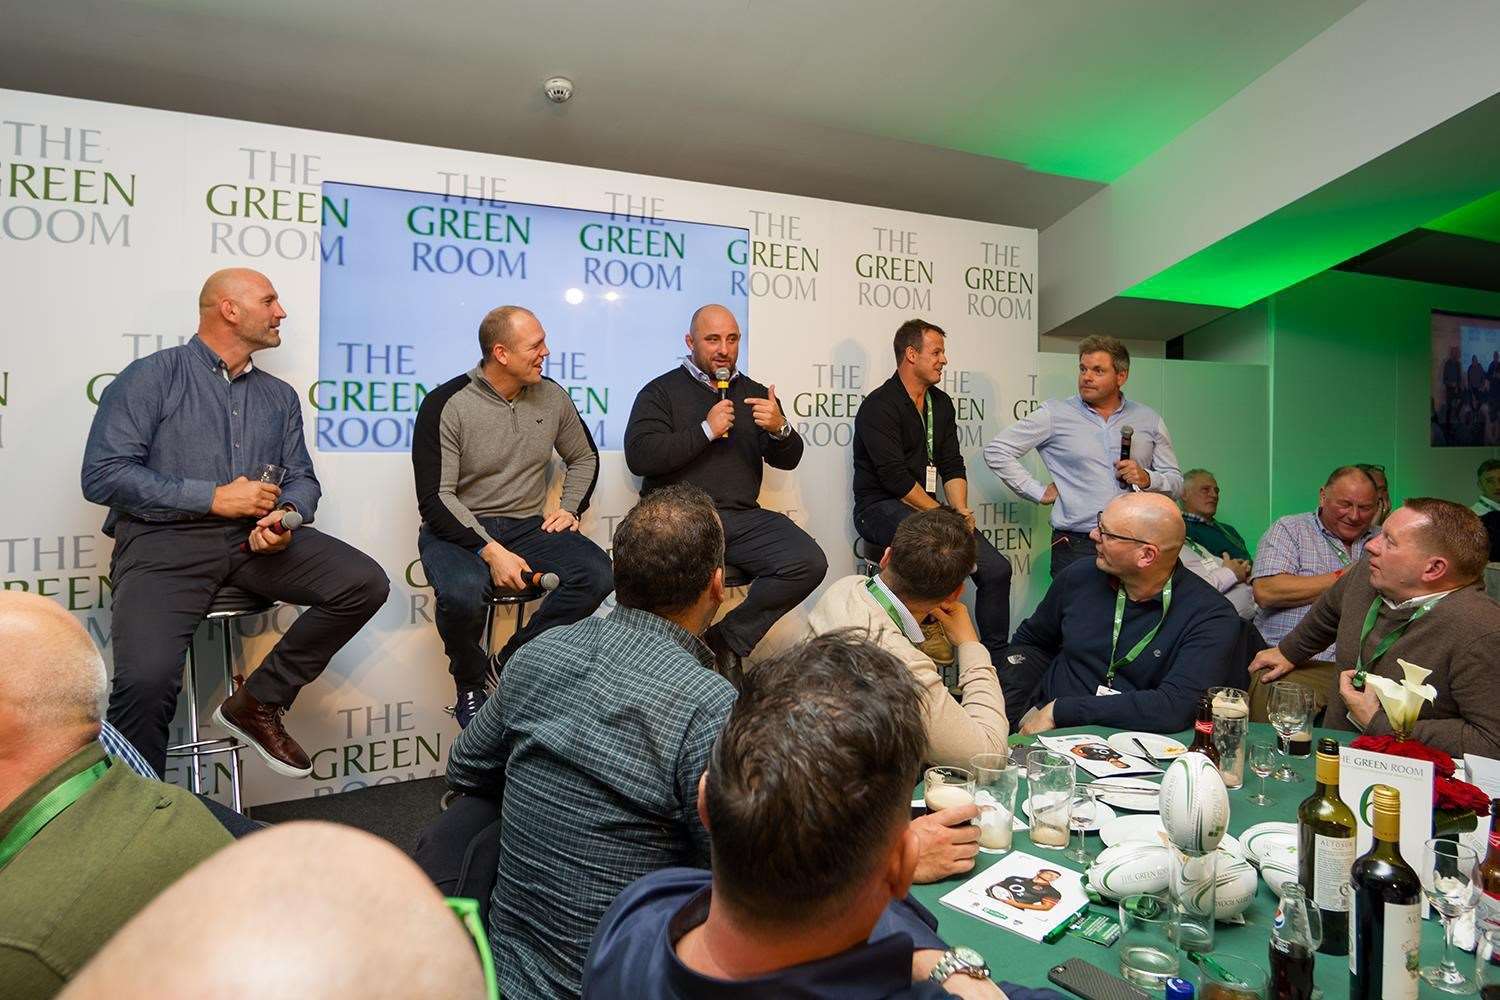 A Hospitality Finder Green Room experience with, from left, England rugby stars Lawrence Dallaglio, Mike Tindall, David Flatman, Austin Healey and compere Mark Durden-Smith